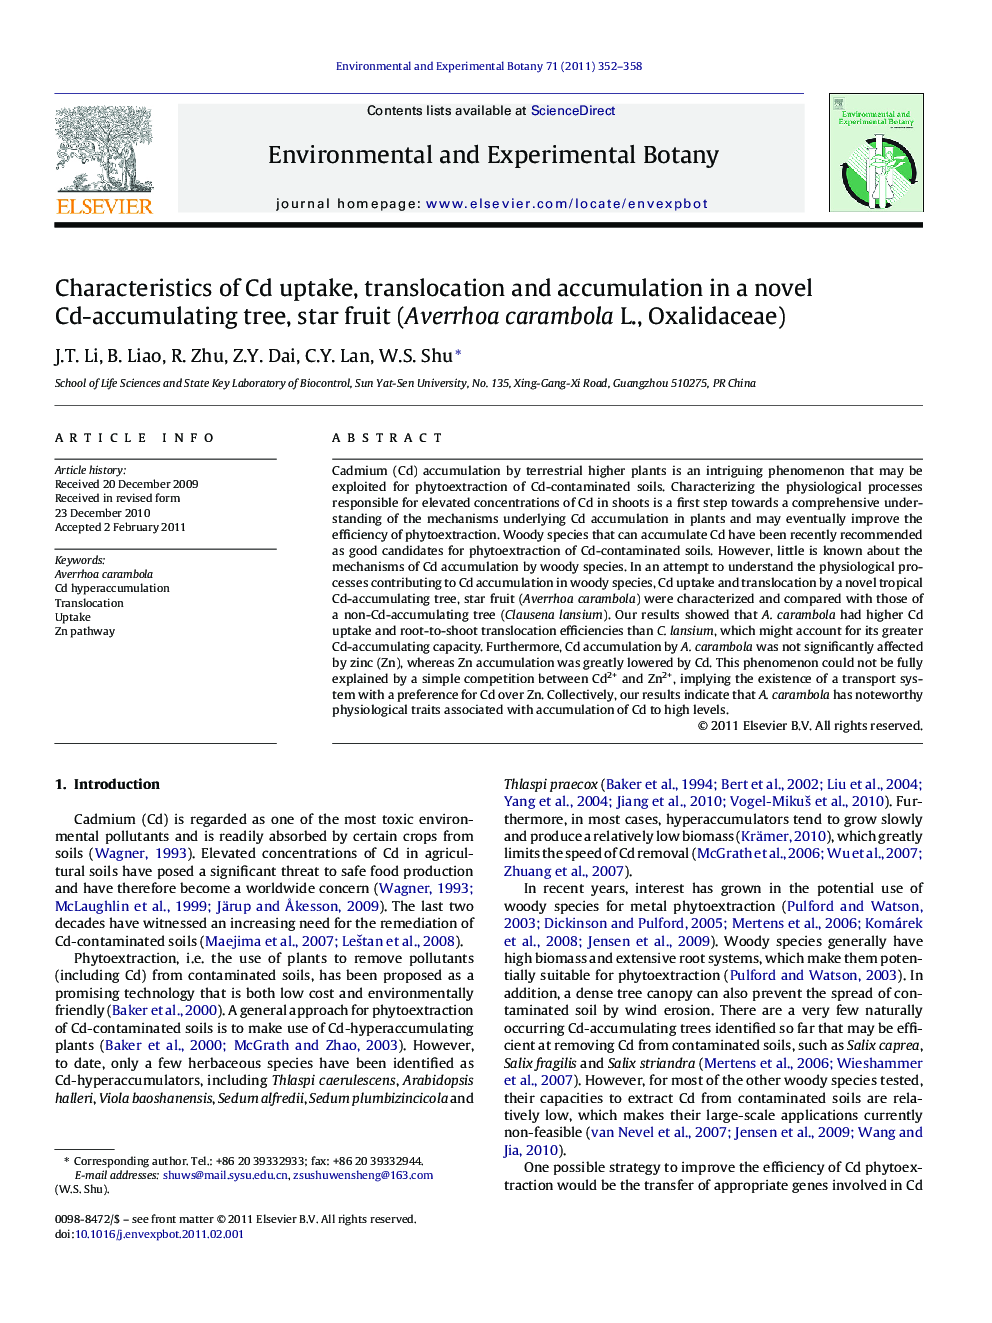 Characteristics of Cd uptake, translocation and accumulation in a novel Cd-accumulating tree, star fruit (Averrhoa carambola L., Oxalidaceae)